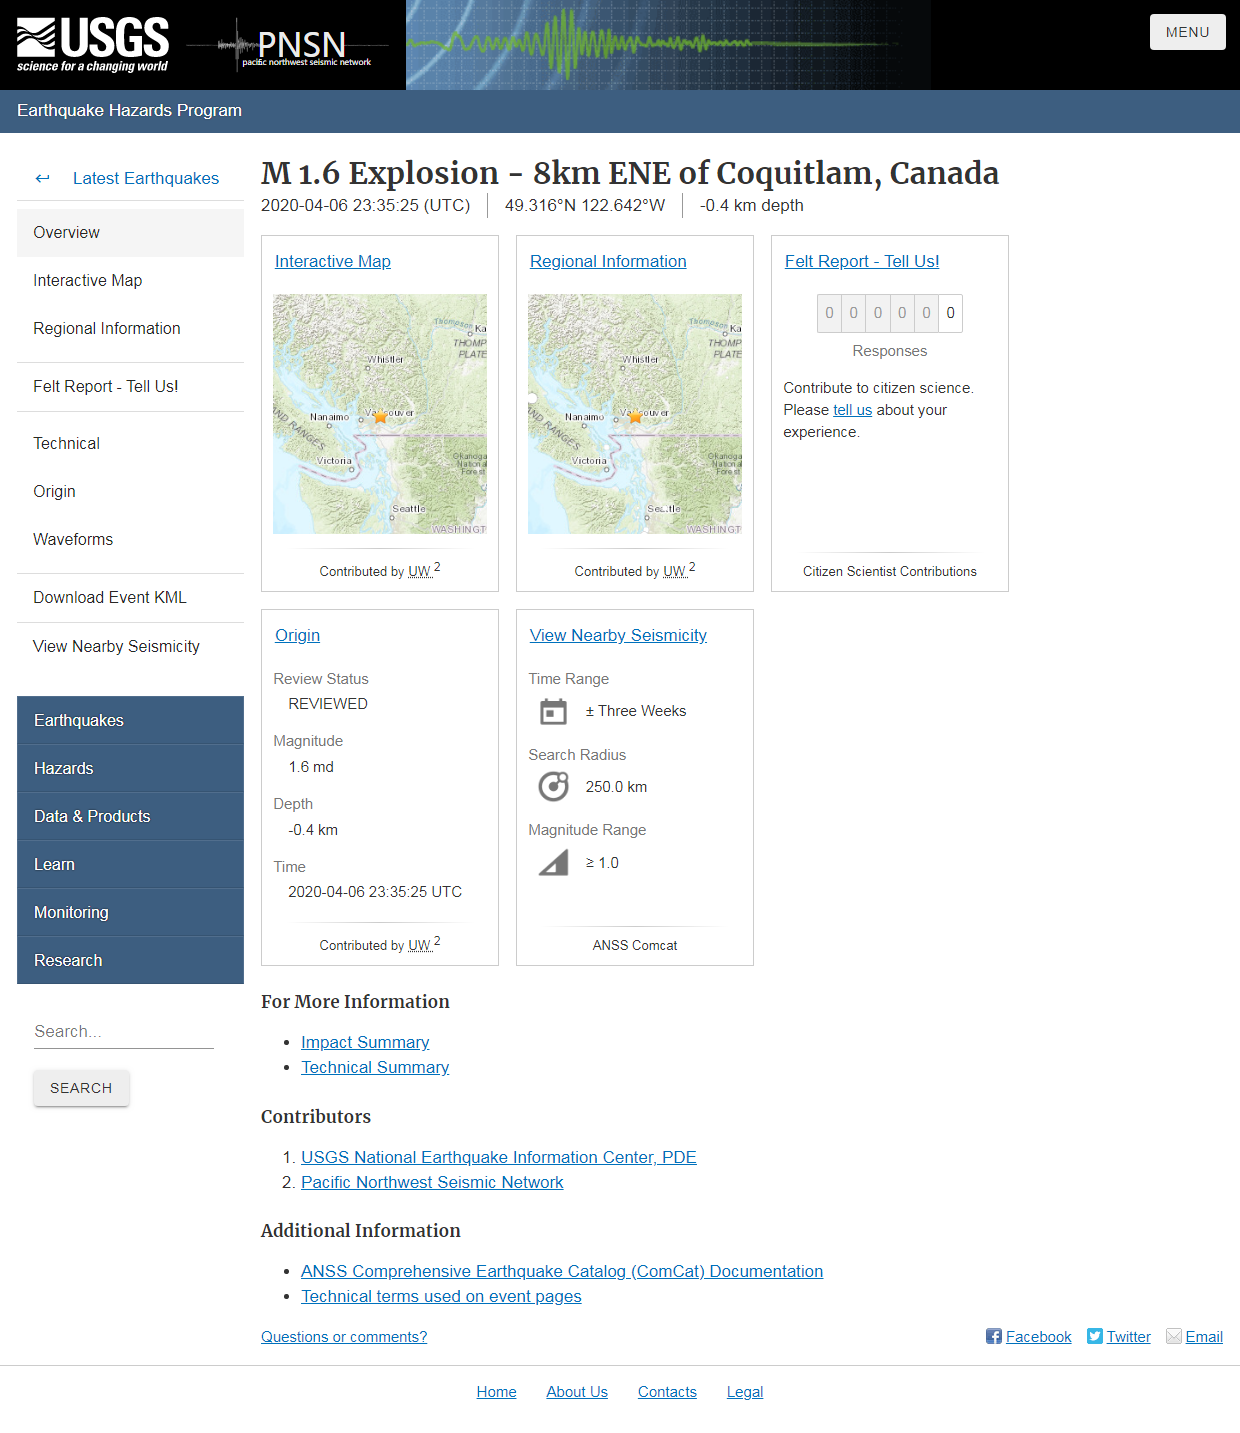 M 1.6 Explosion - 8km ENE of Coquitlam, Canada.png